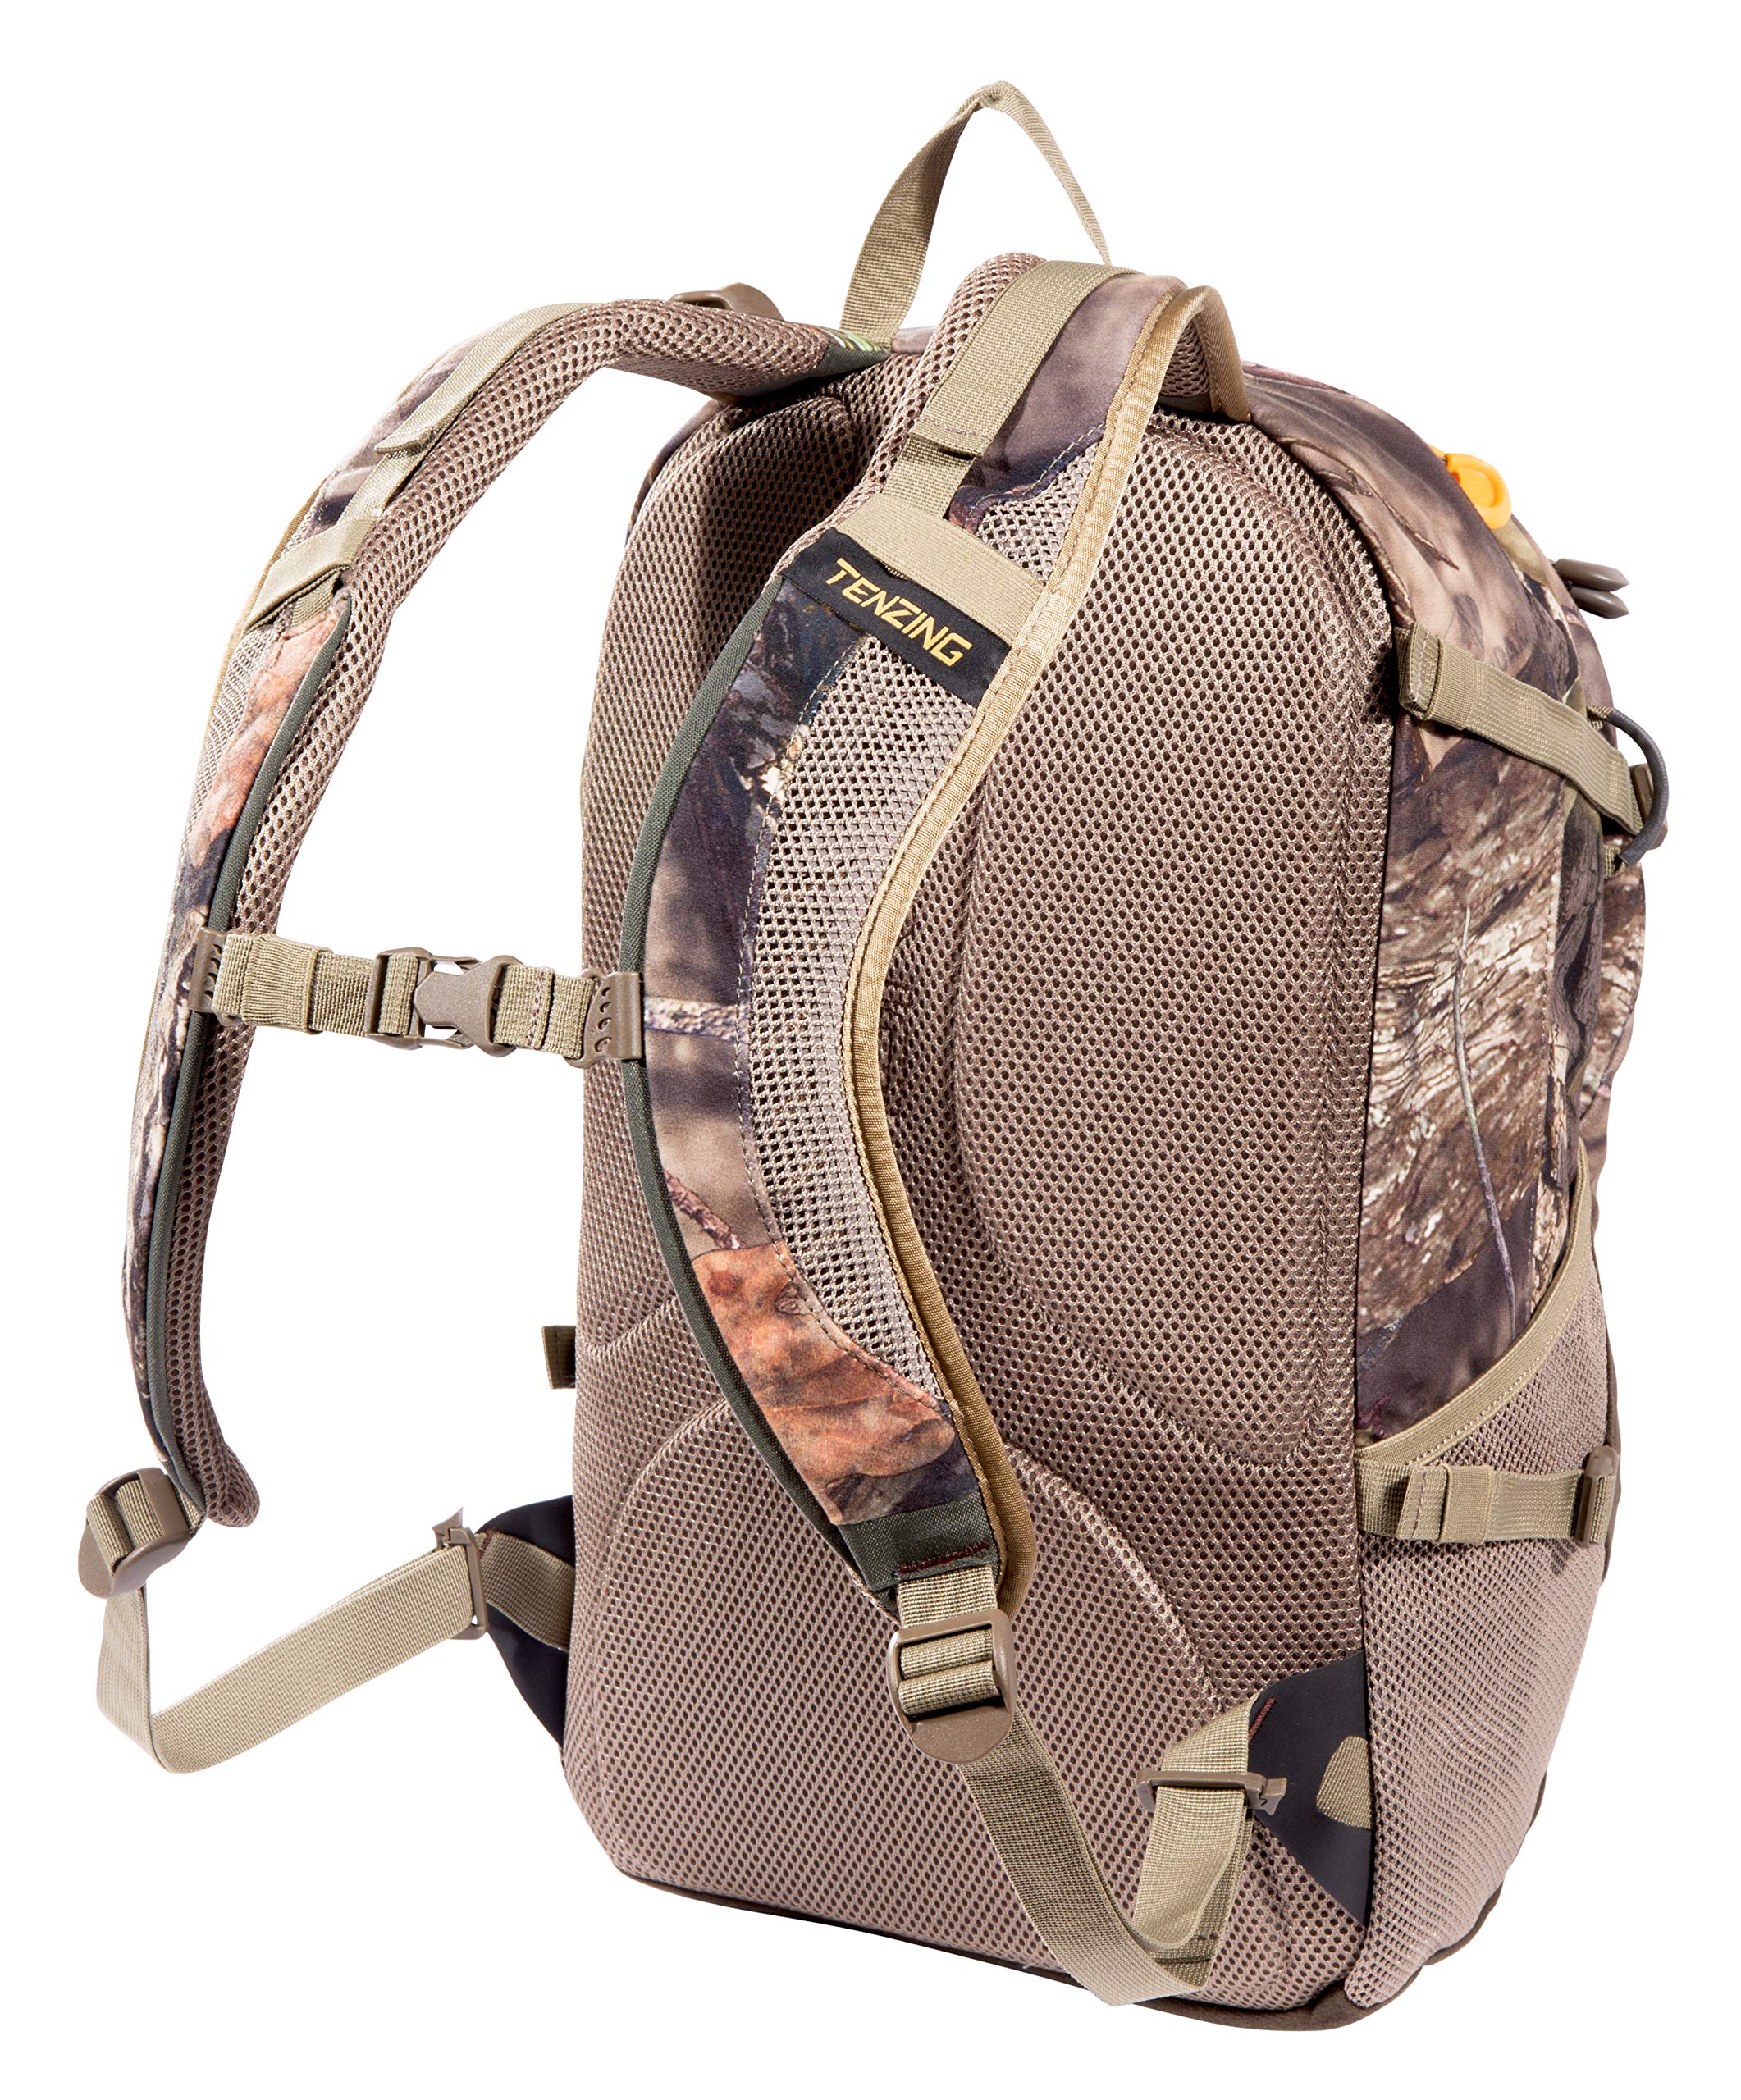 Tenzing TX Series Hunting Packs| Premium Bow and Rifle Hunting Packs Featuring Mossy Oak Break-Up Country Camo | Available in Backpack and Waist Pack Styles